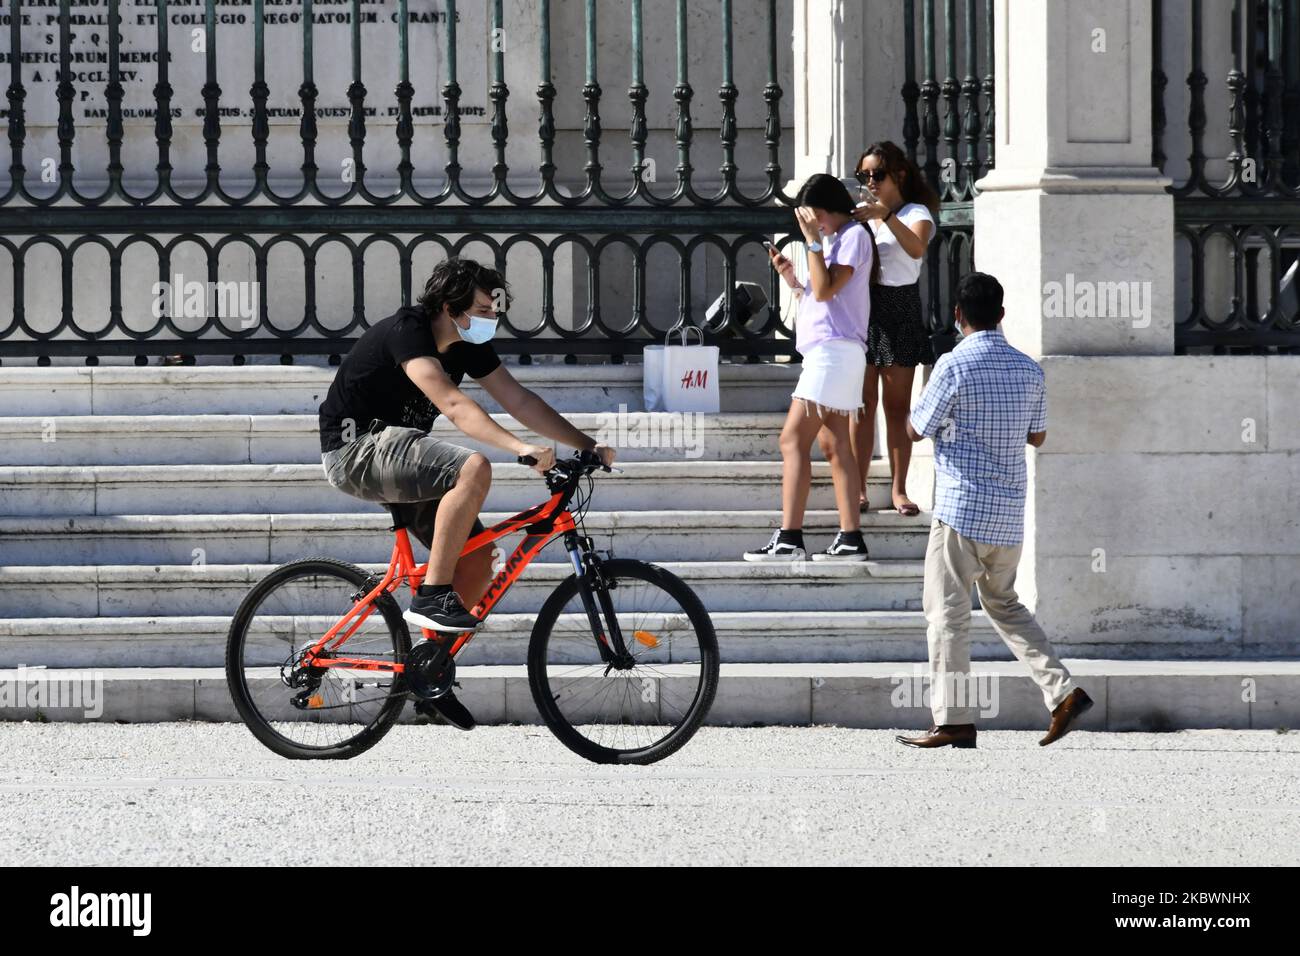 A man wearing a protective mask rides a bicycle in Praça de Comércio, Lisbon, Portugal on 4 August 2020. Portugal registered on Monday, August 3, its first day without deaths from COVID-19 since mid-March and at the same time reported the lowest number of new cases in almost three months. The absence of deaths was highlighted at a press conference as a 'positive note of hope' by the Secretary of State for Health, António Lacerda Sales. (Photo by Jorge Mantilla/NurPhoto) Stock Photo